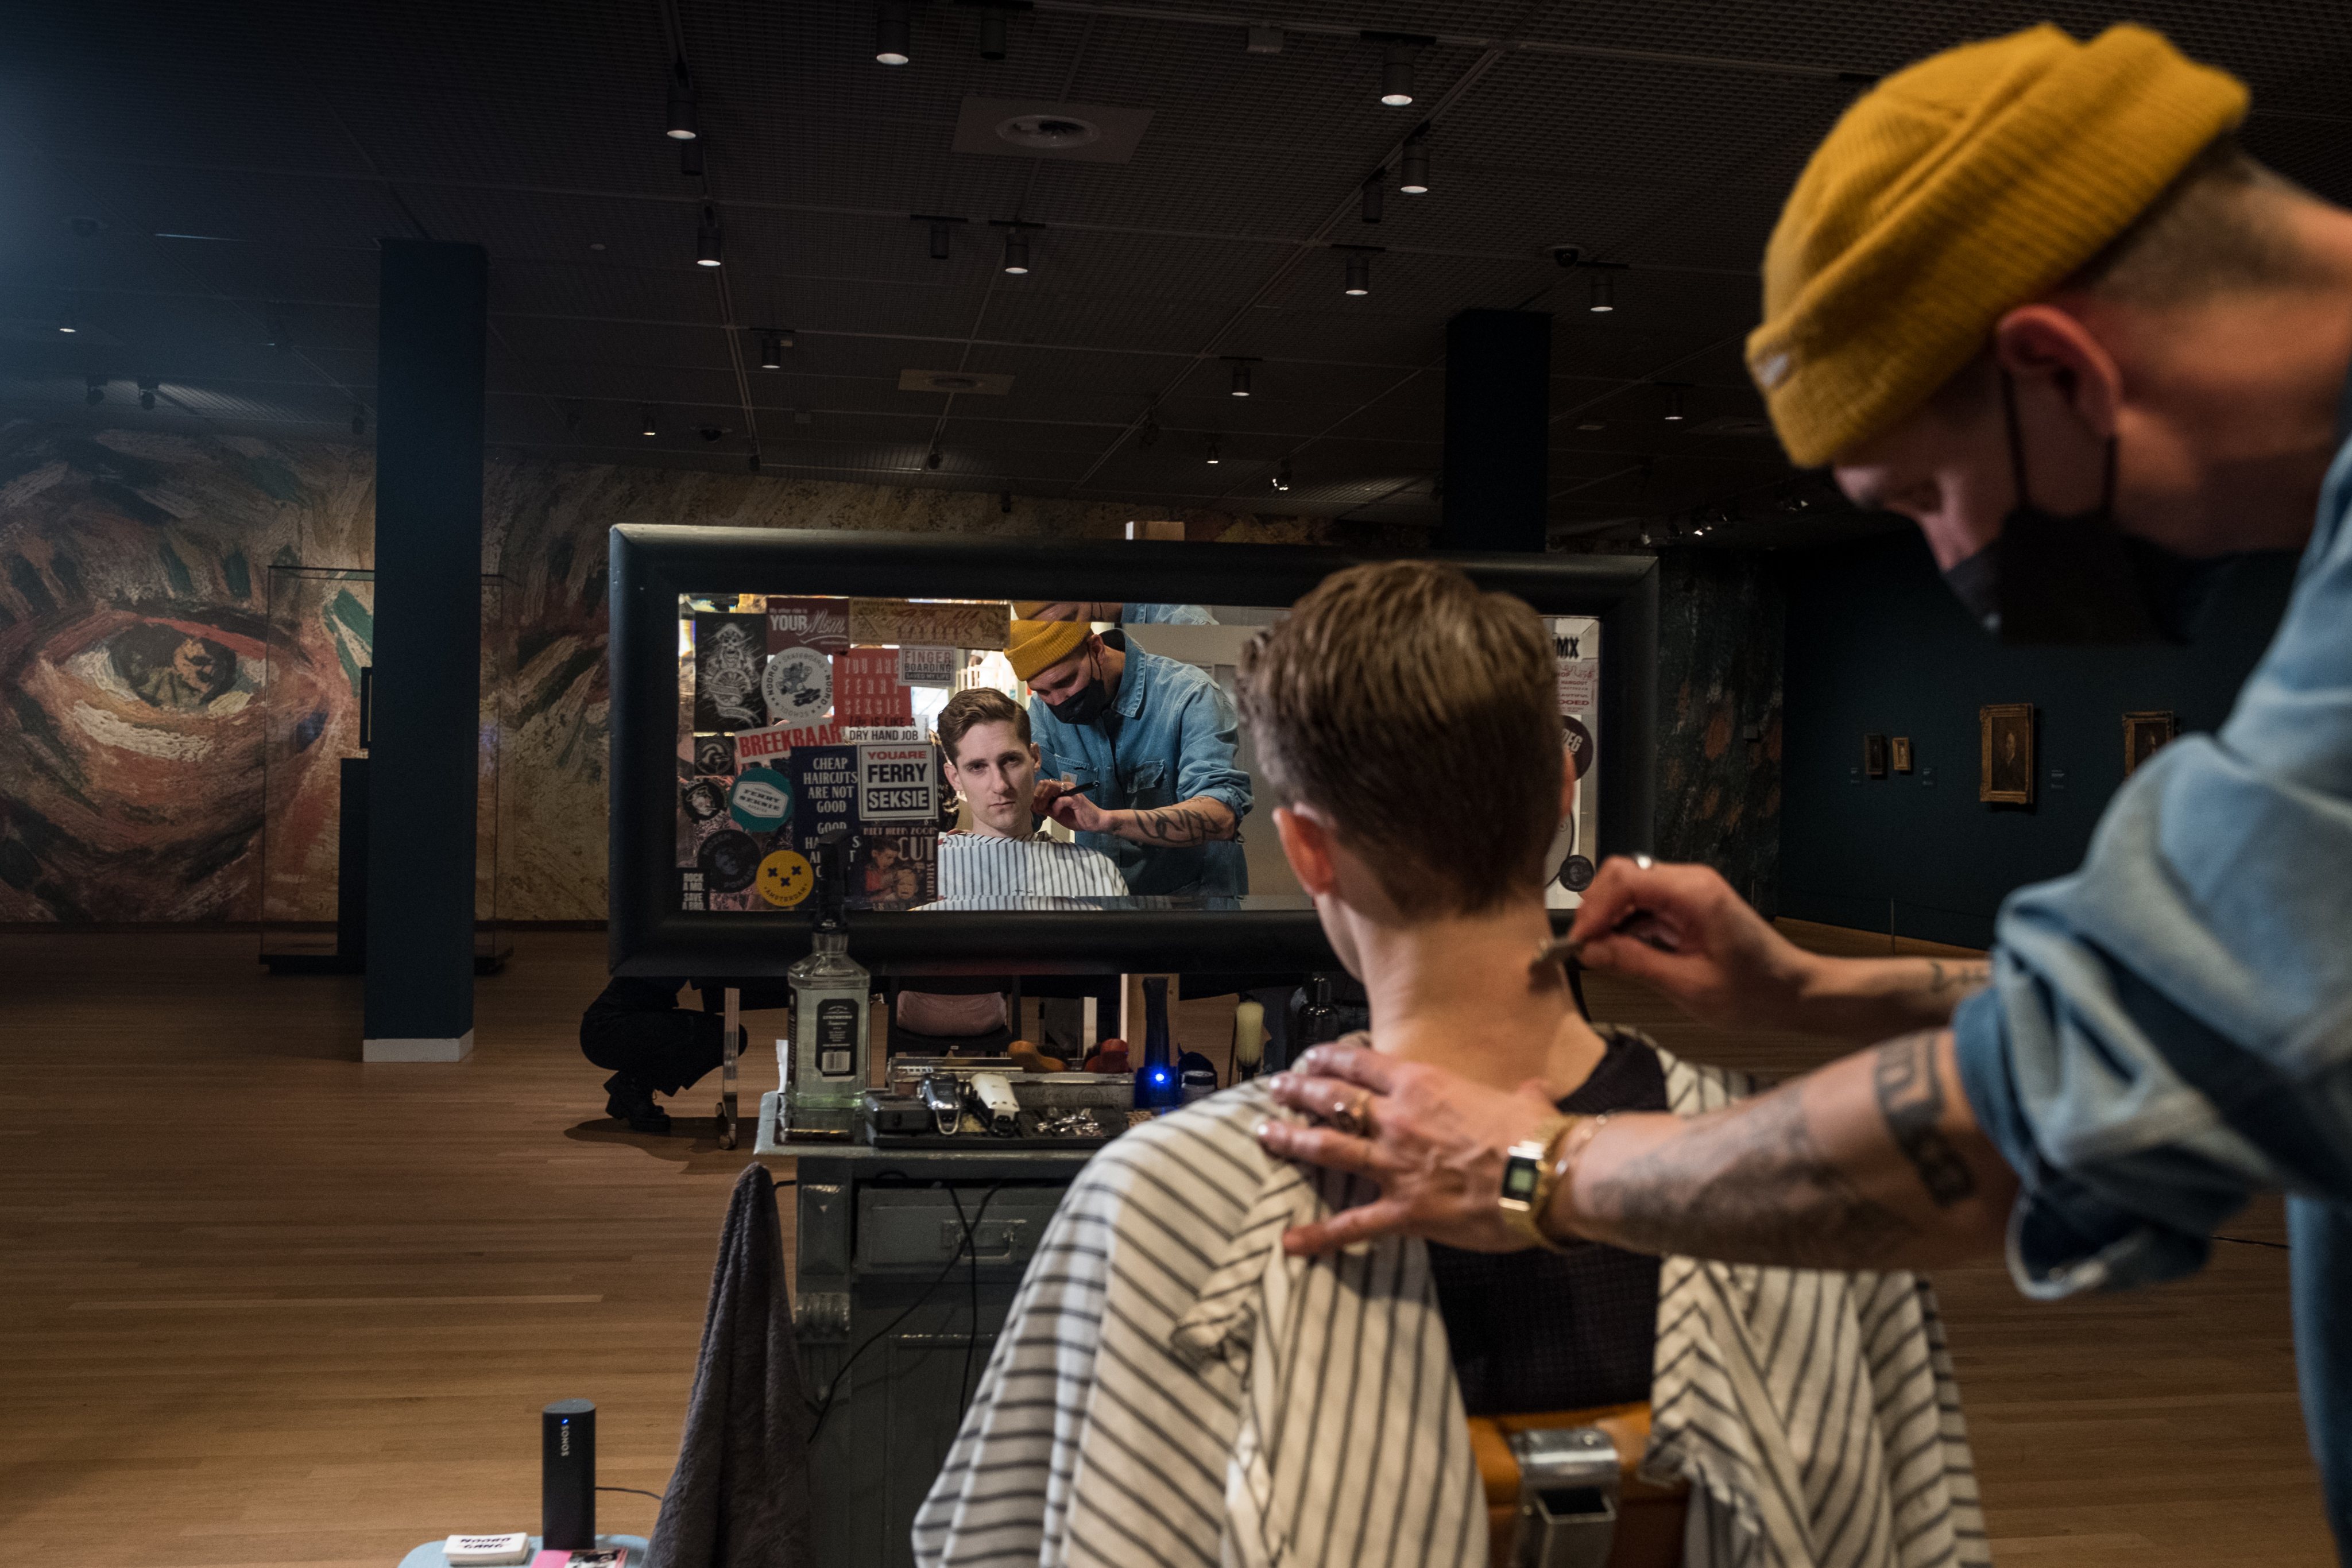 Dutch Theaters Host Haircuts To Highlight Covid Impact On Culture Sector